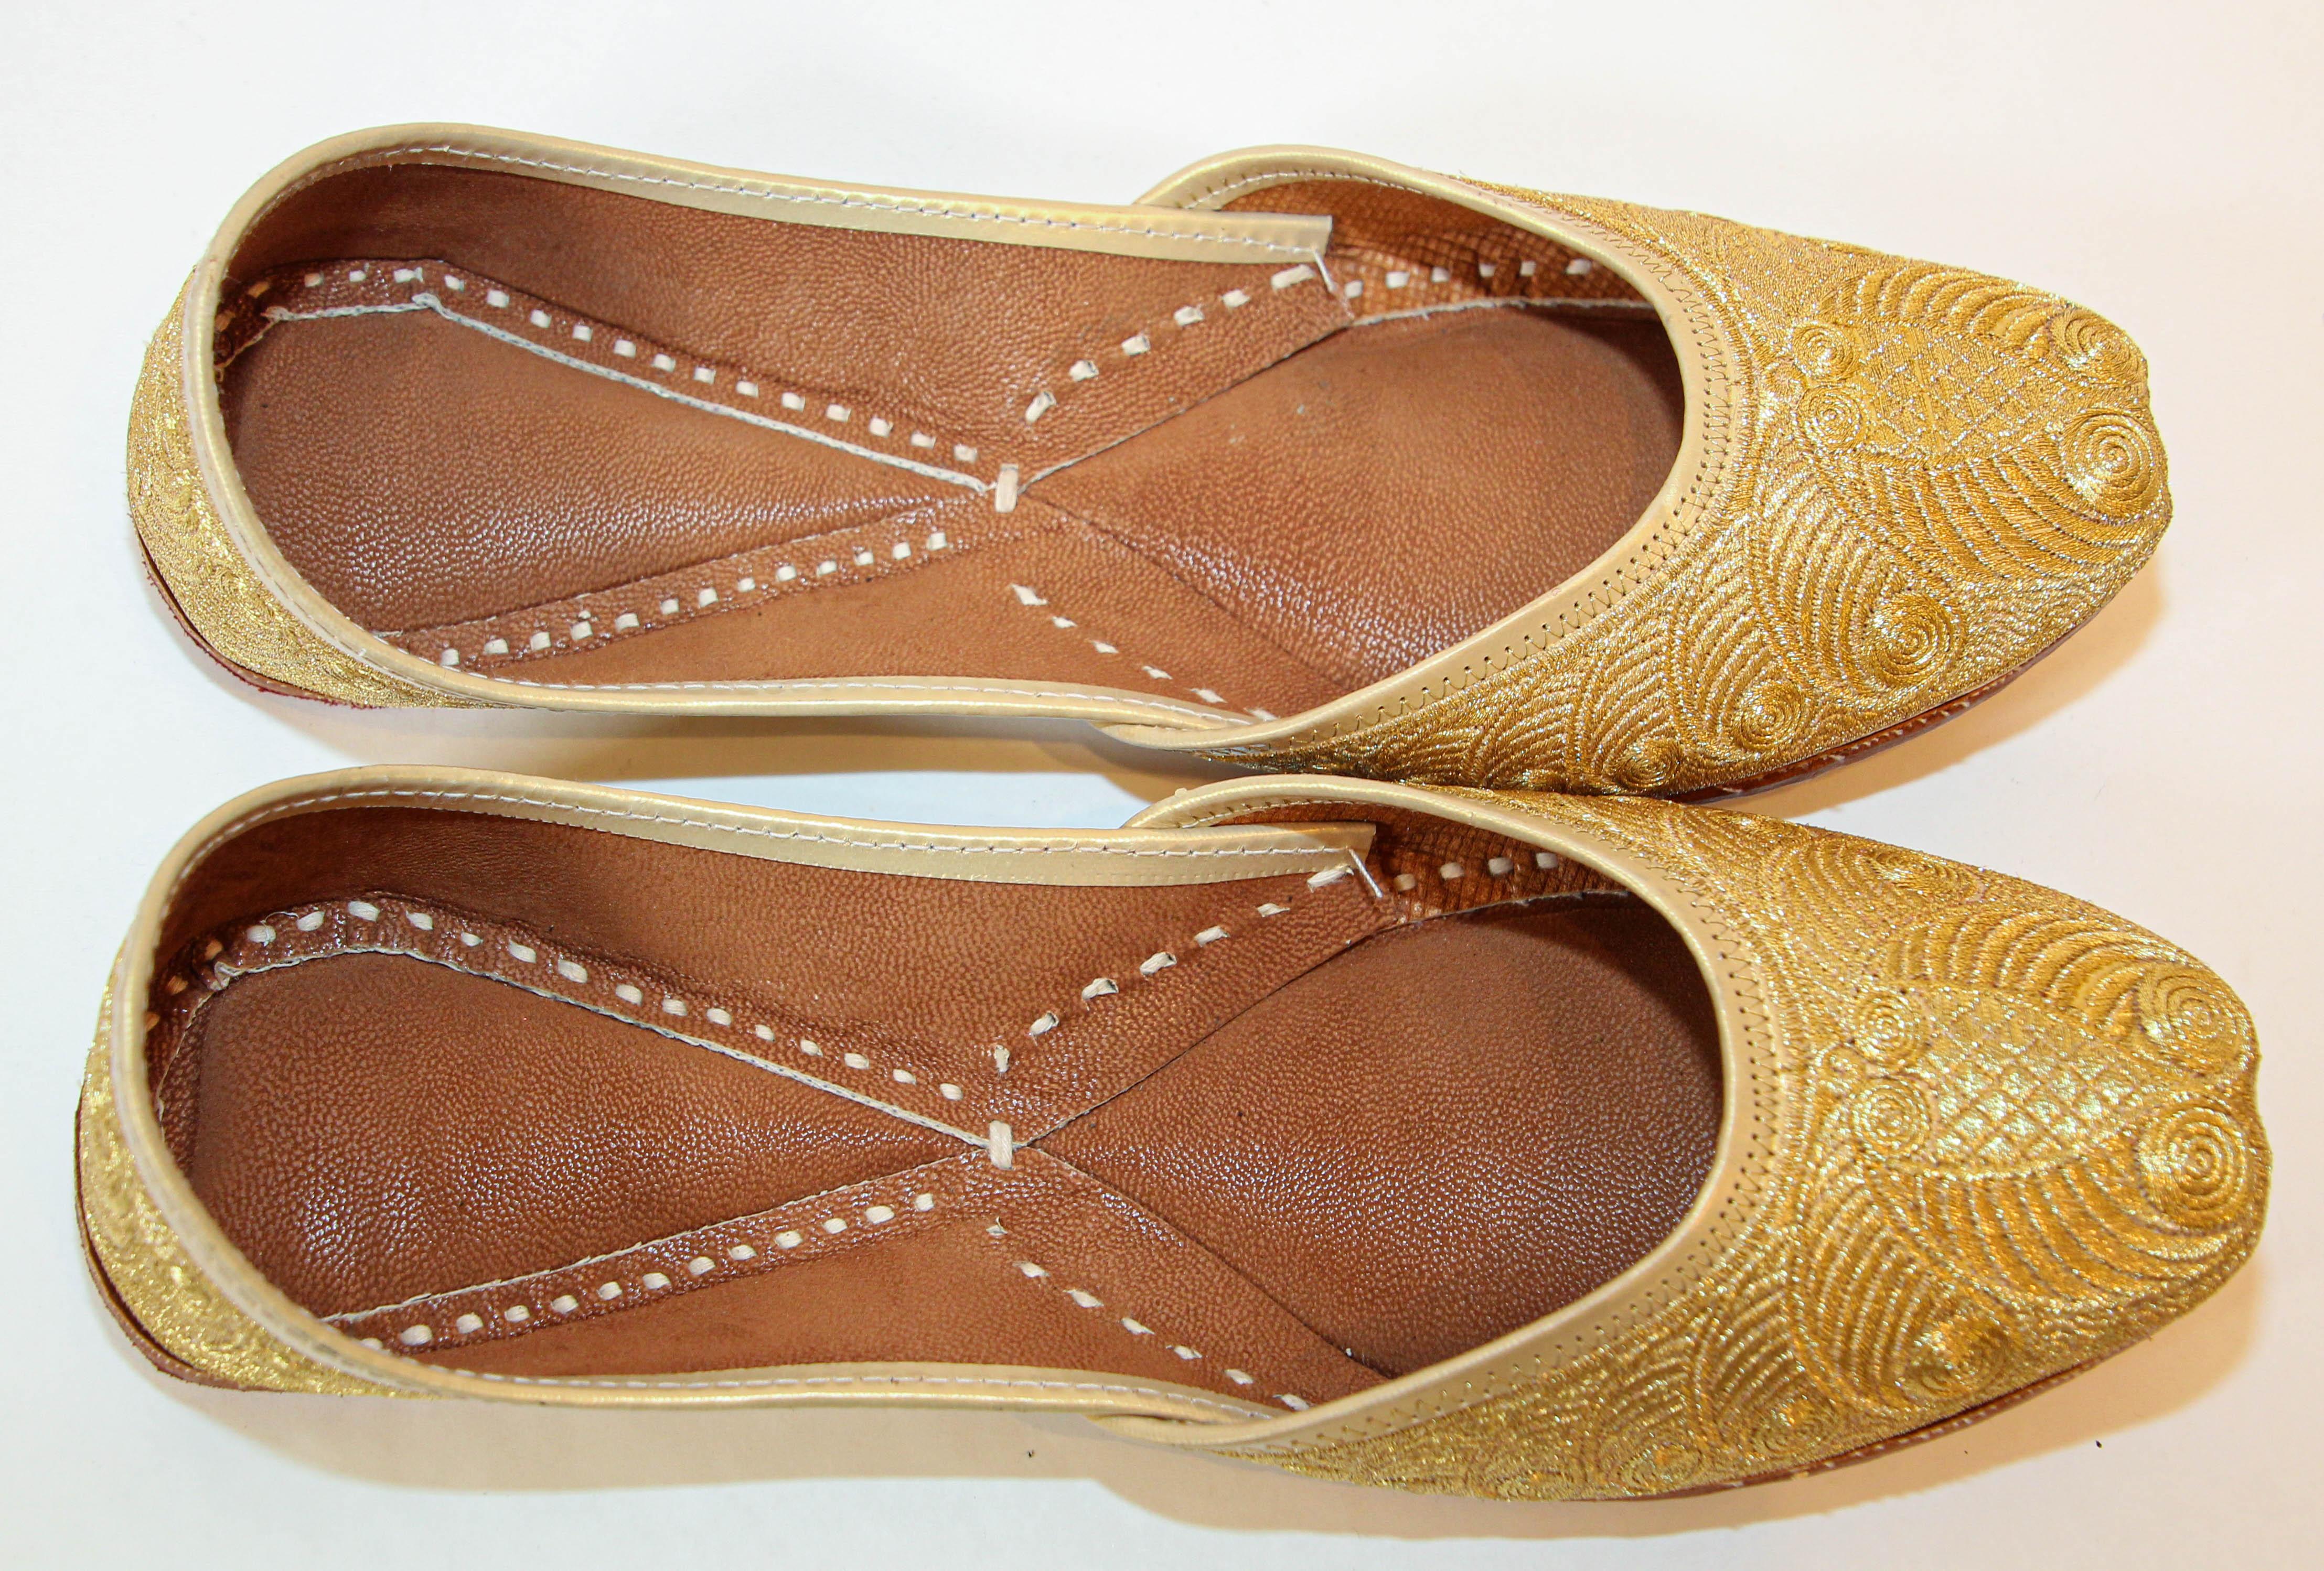 Vintage 1970s gold leather Indian Punjabi jutti wedding shoes.
Vintage hand stitched and hand tooled leather shoes with hand embroidered with gilt metallic threads.
Amazing Mughal style gold embroidered traditional Islamic Indian leather shoes fit